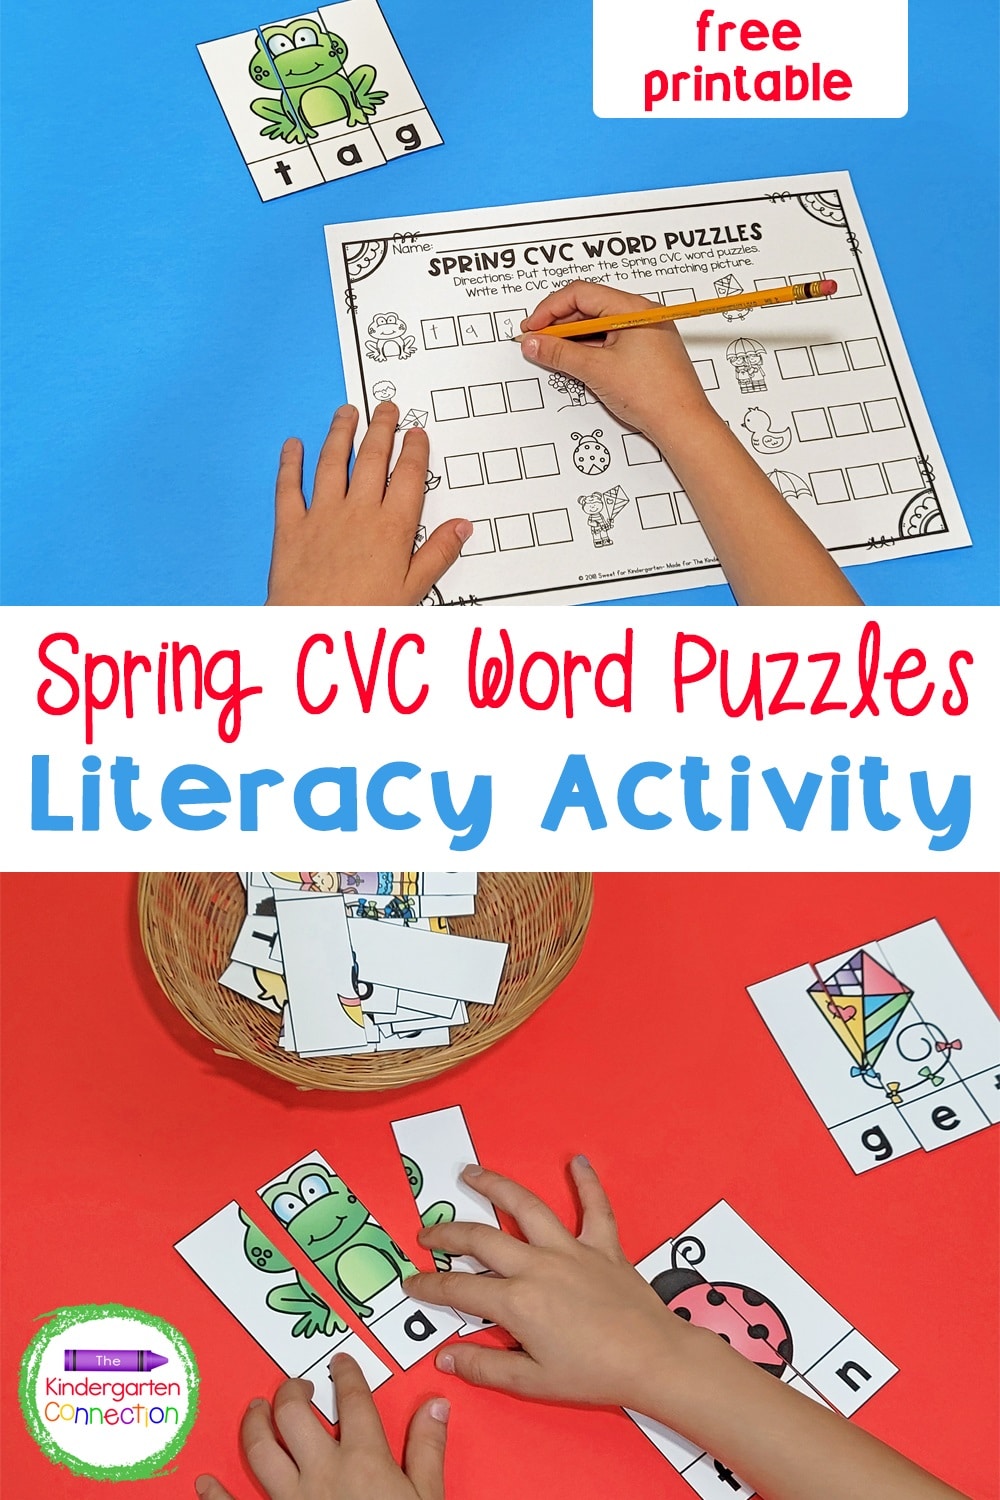 These free Spring CVC Word Puzzles are perfect for spring literacy centers or small groups in Kindergarten or 1st grade!